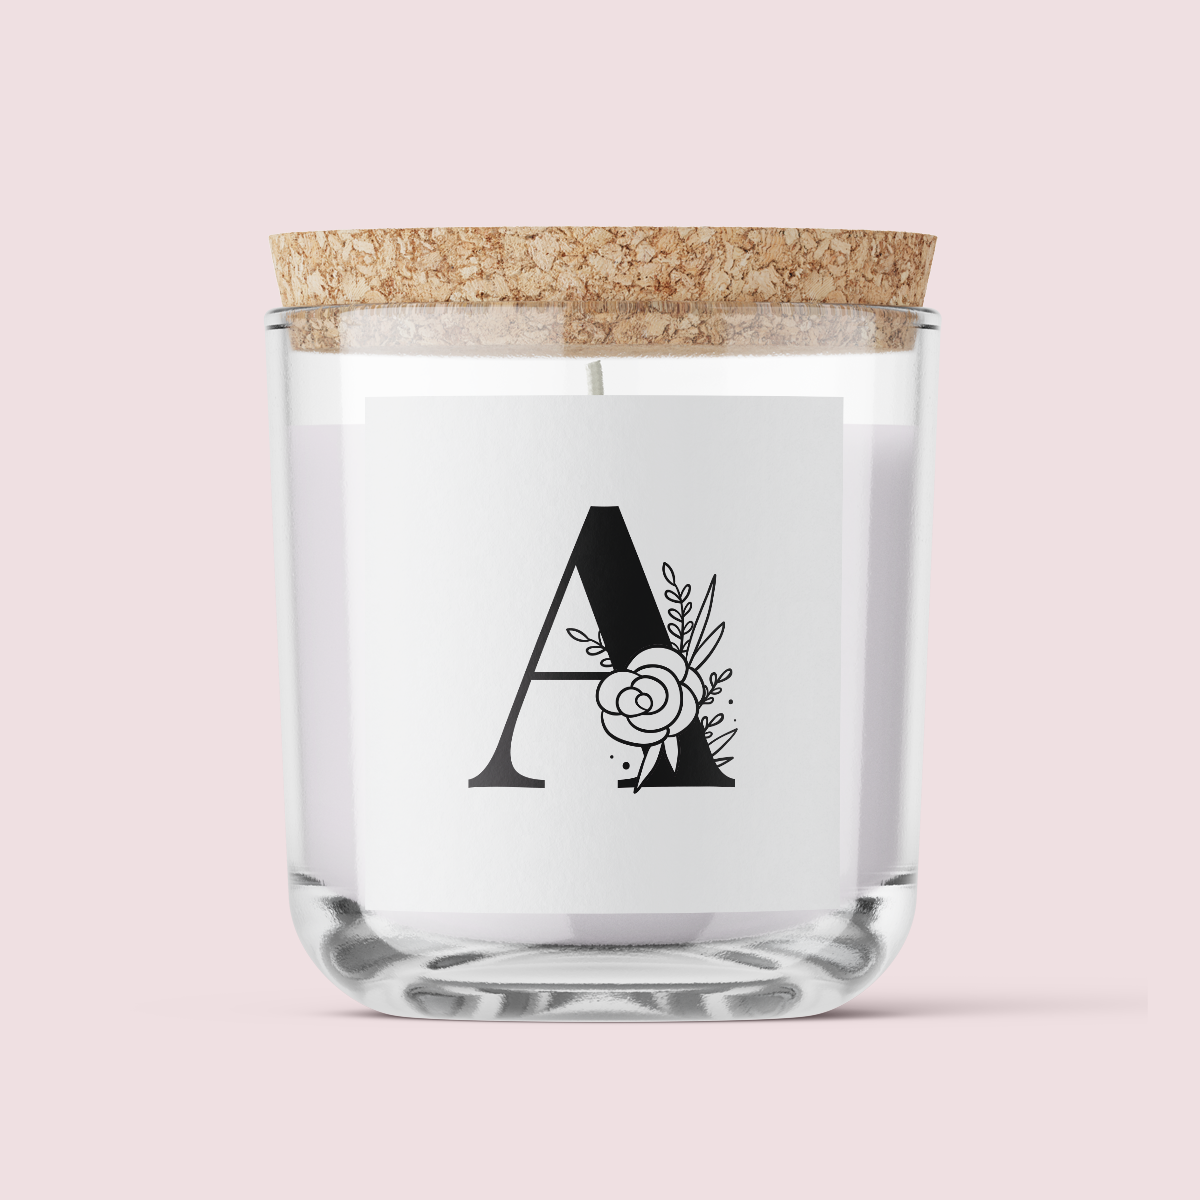 Floral Initials - Letter A - SQUARE